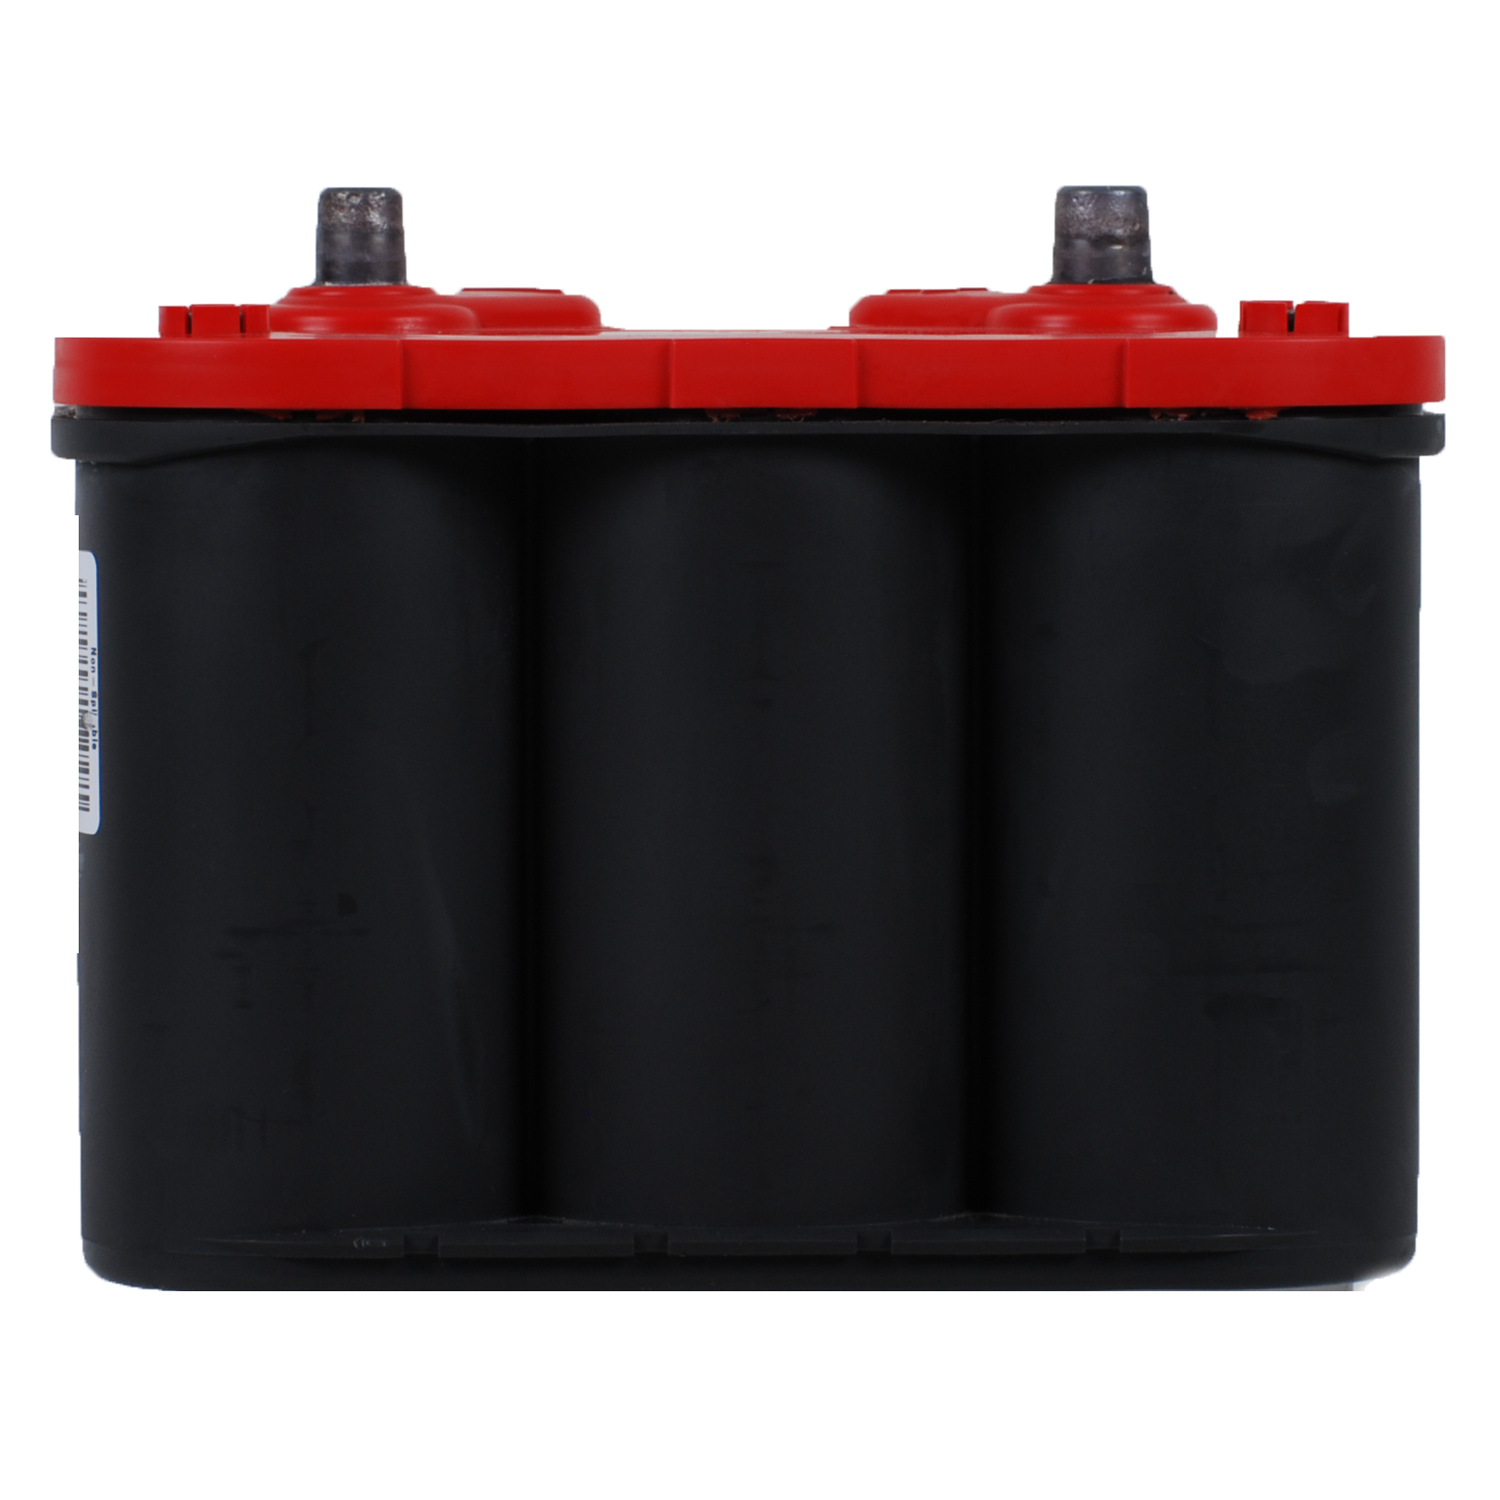 OPTIMA RedTop AGM Spiralcell Automotive Starting Battery, Group Size 34/78, 12 Volt 800 CCA - image 3 of 7